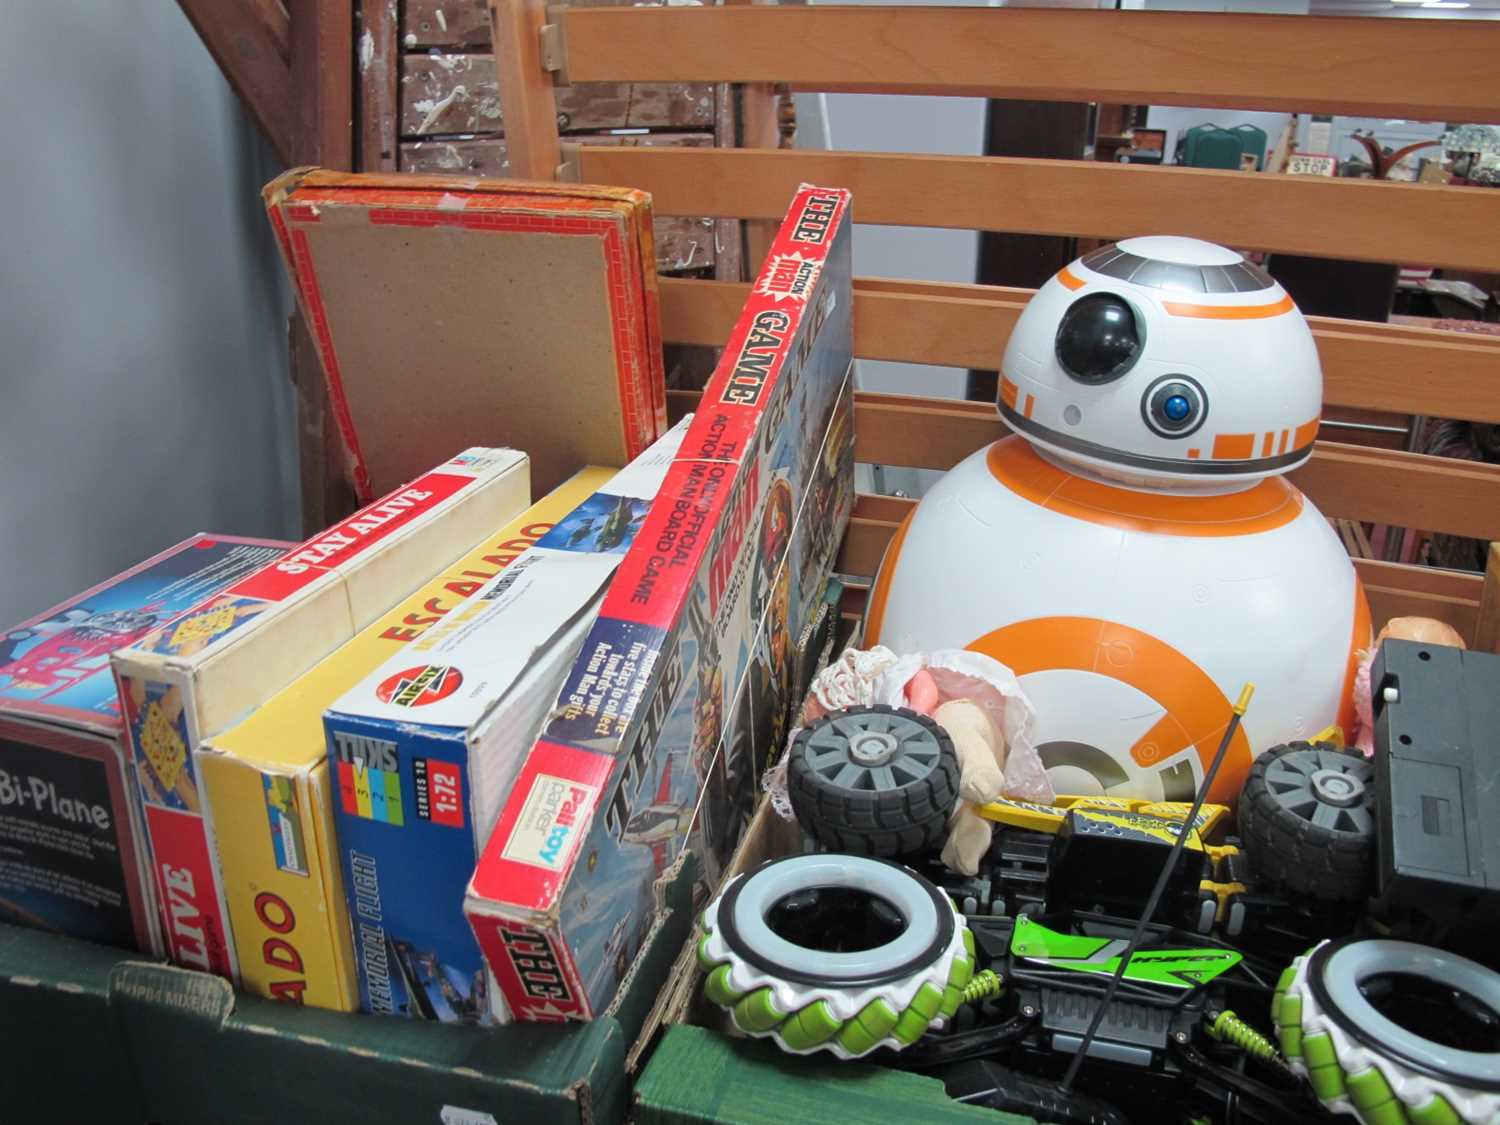 Toys and Games, to include Escalado, The Action Man Game, Doctor Who, Cyberman Bust, BB-8 model,